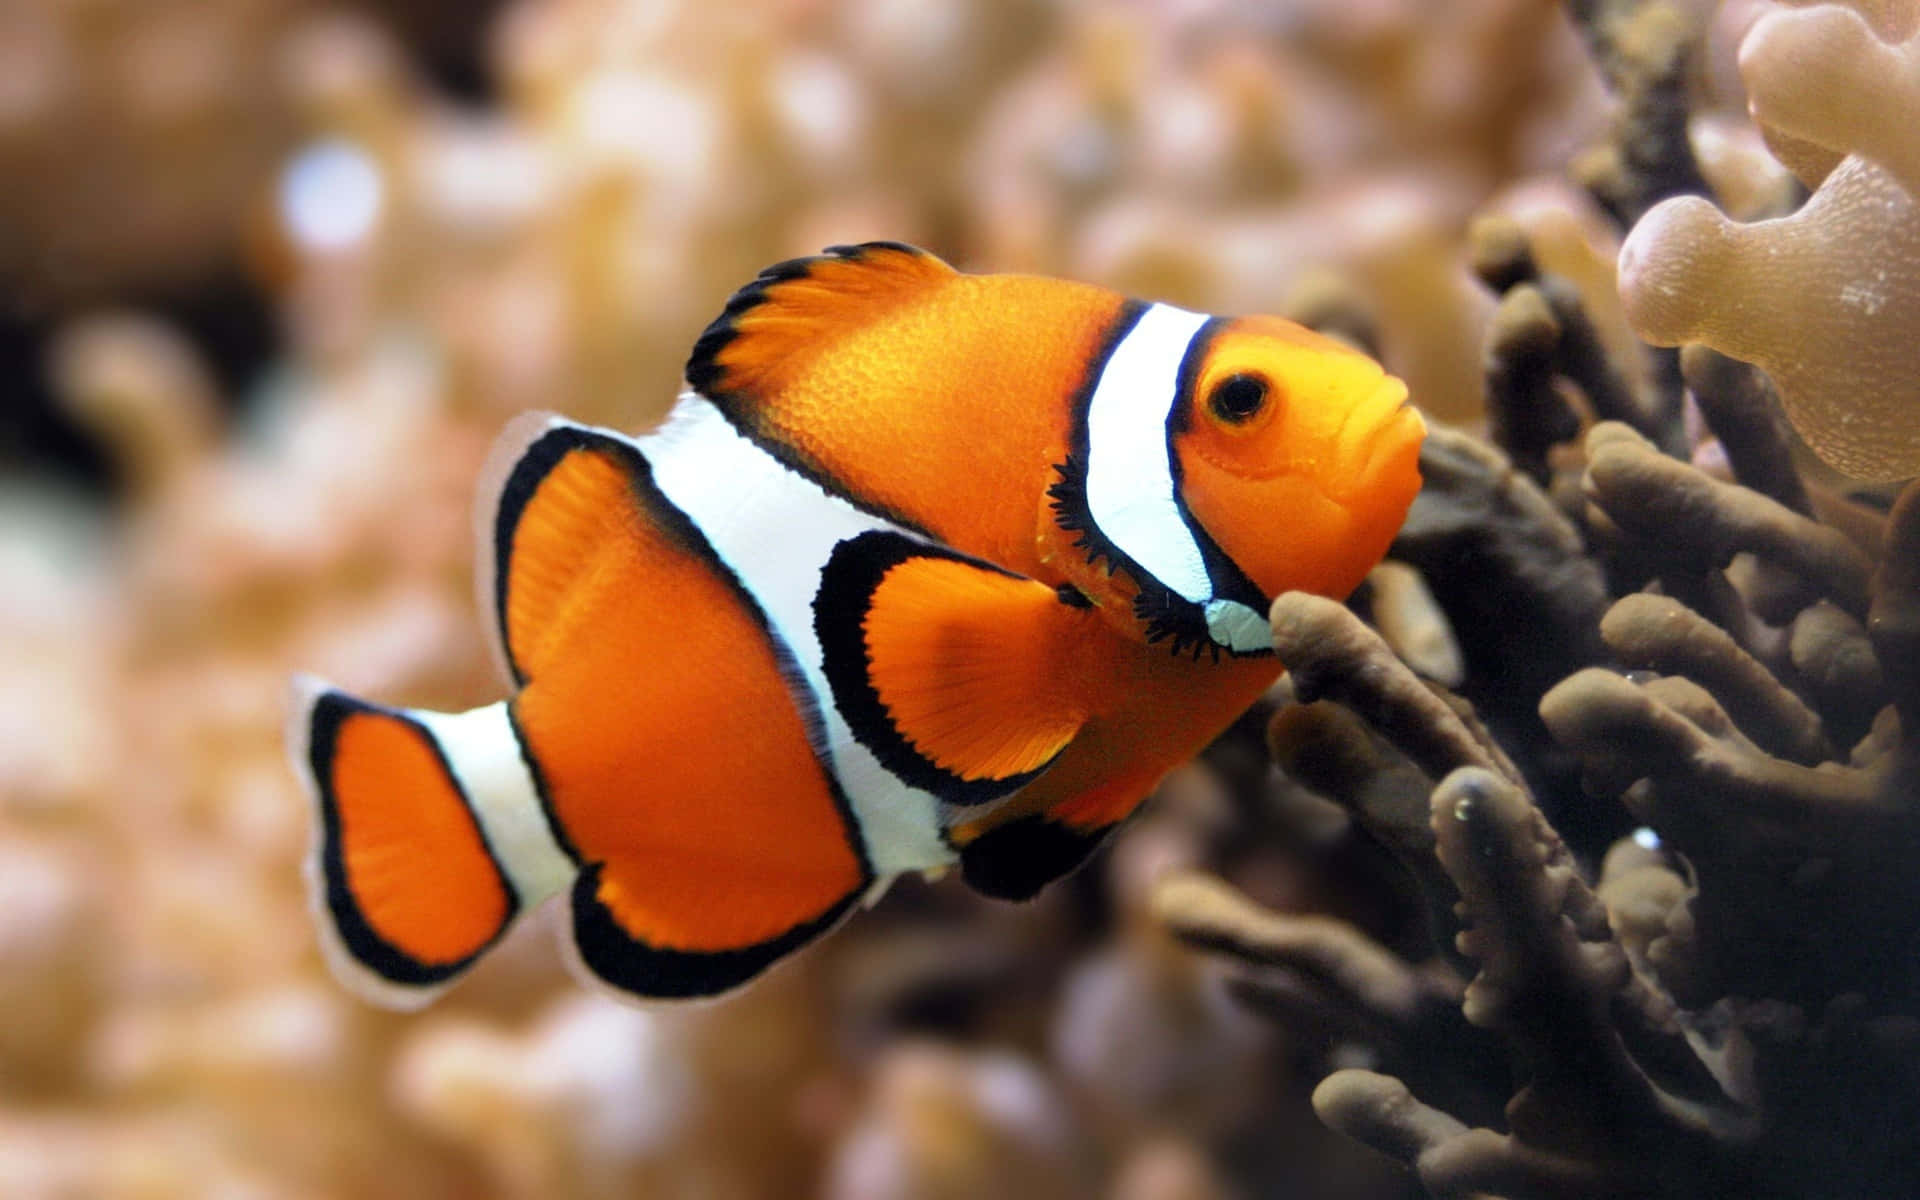 A close-up of a vibrant orange and yellow fish in crystal-clear water.